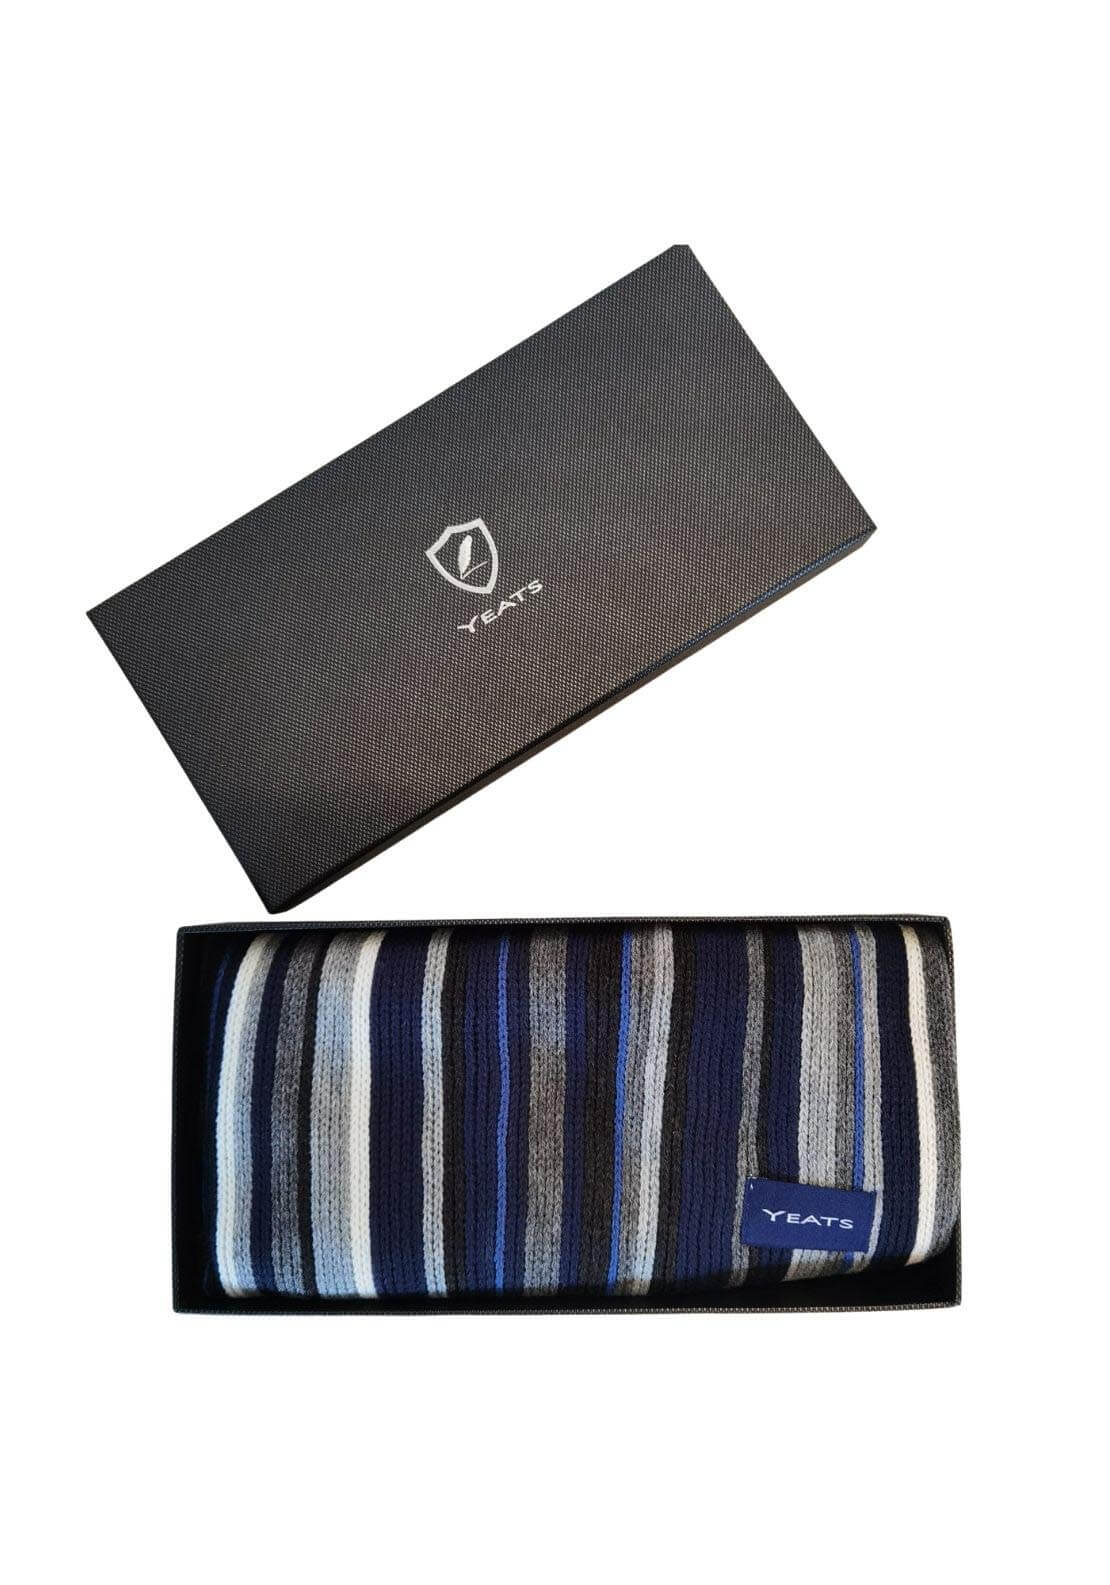 Yeats Boxed Raschel Scarf - Grey / Blue 1 Shaws Department Stores